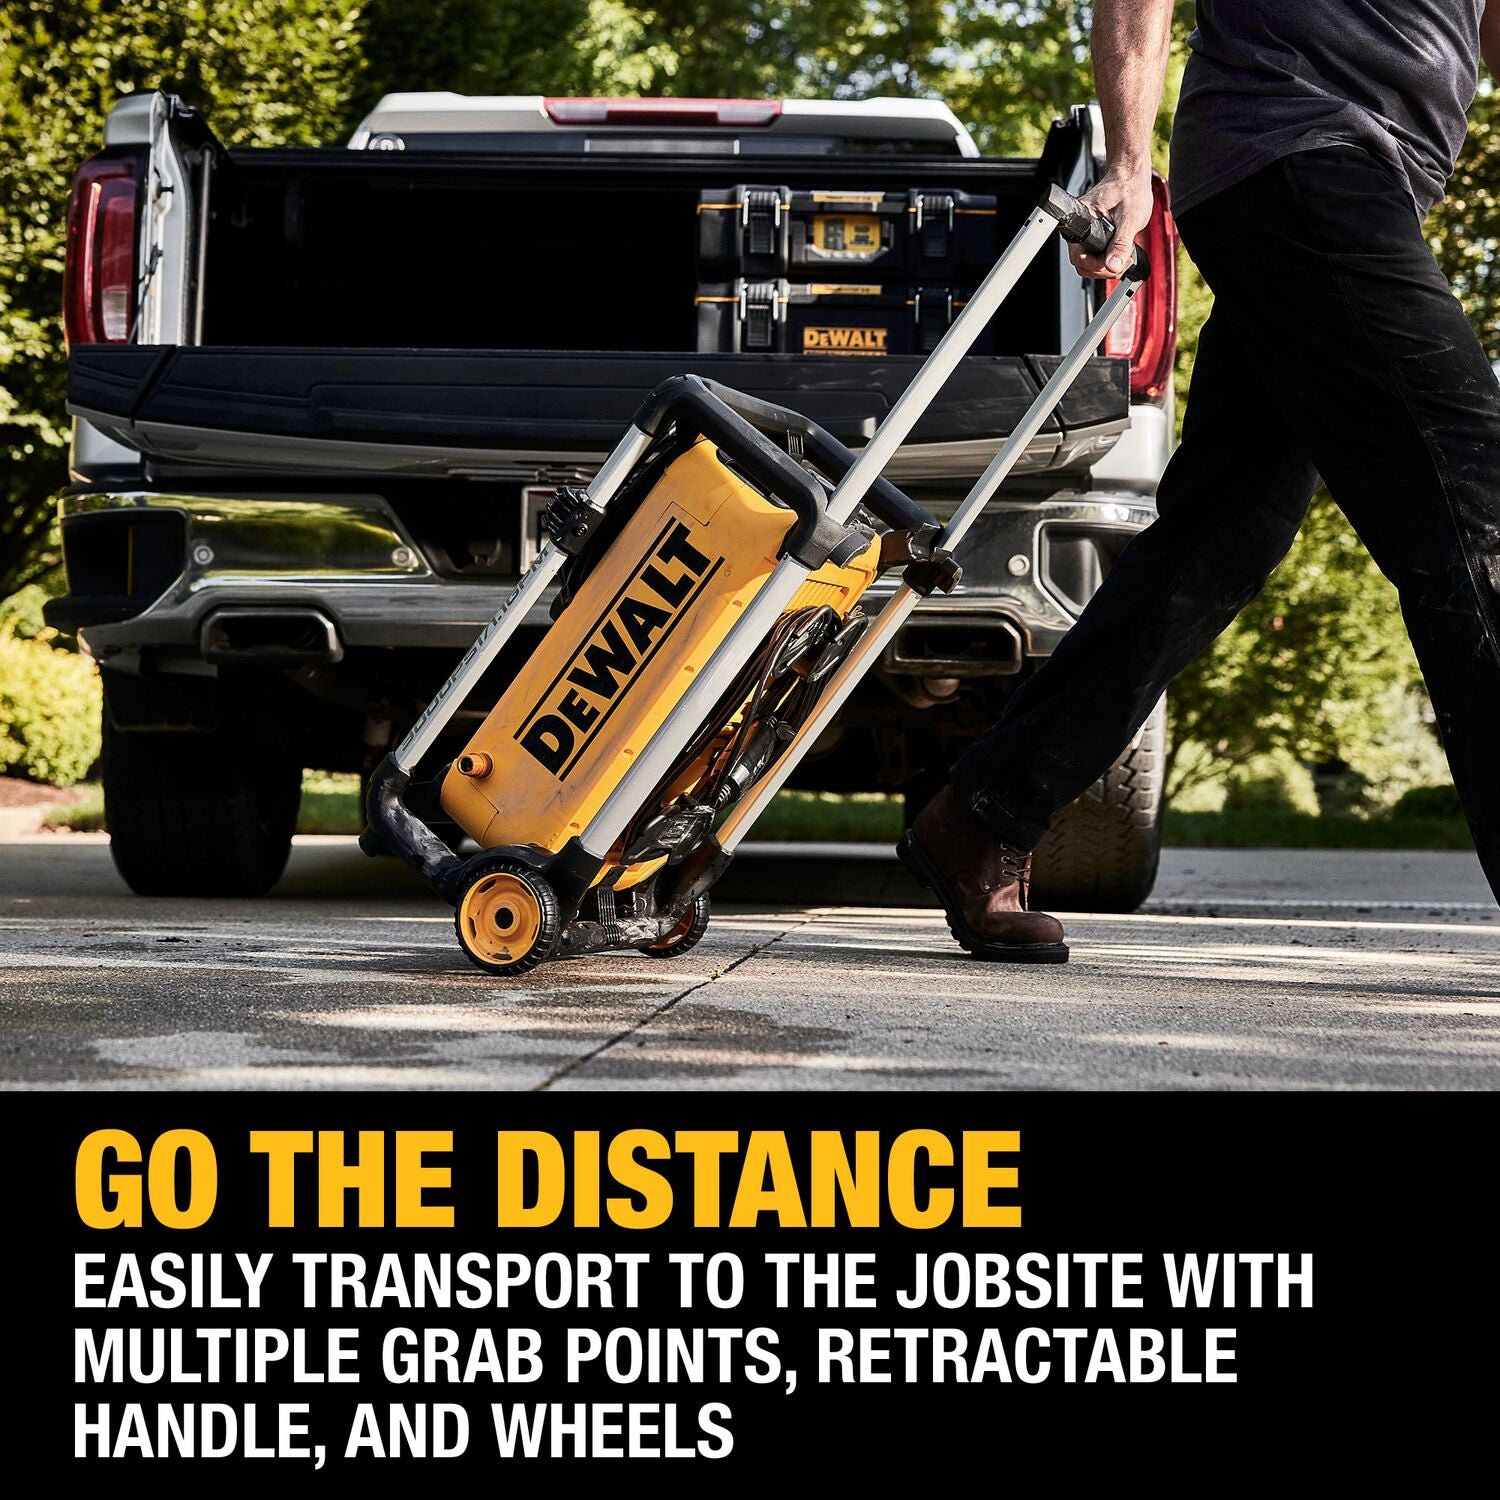 Dewalt DWPW3000 - 3000 MAX PSI* 1.1 GPM** 15 AMP BRUSHLESS JOBSITE ELECTRIC COLD WATER PRESSURE WASHER